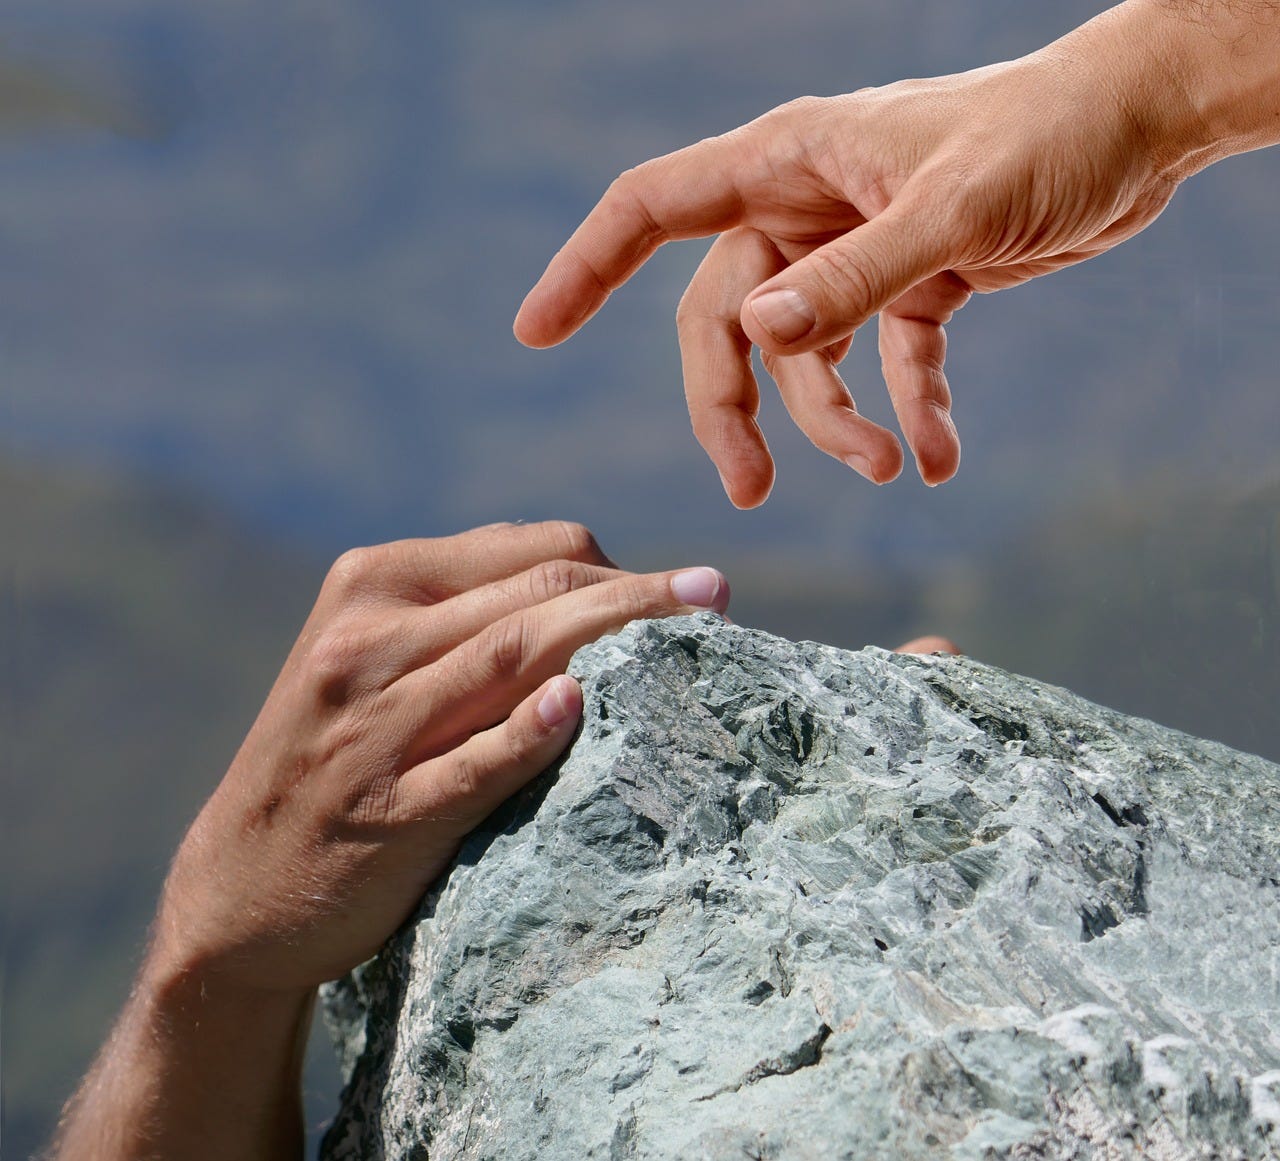 Grey and blue rock climbing scene, with one hand holding onto the edge of a rock and the other hand reaching down to help